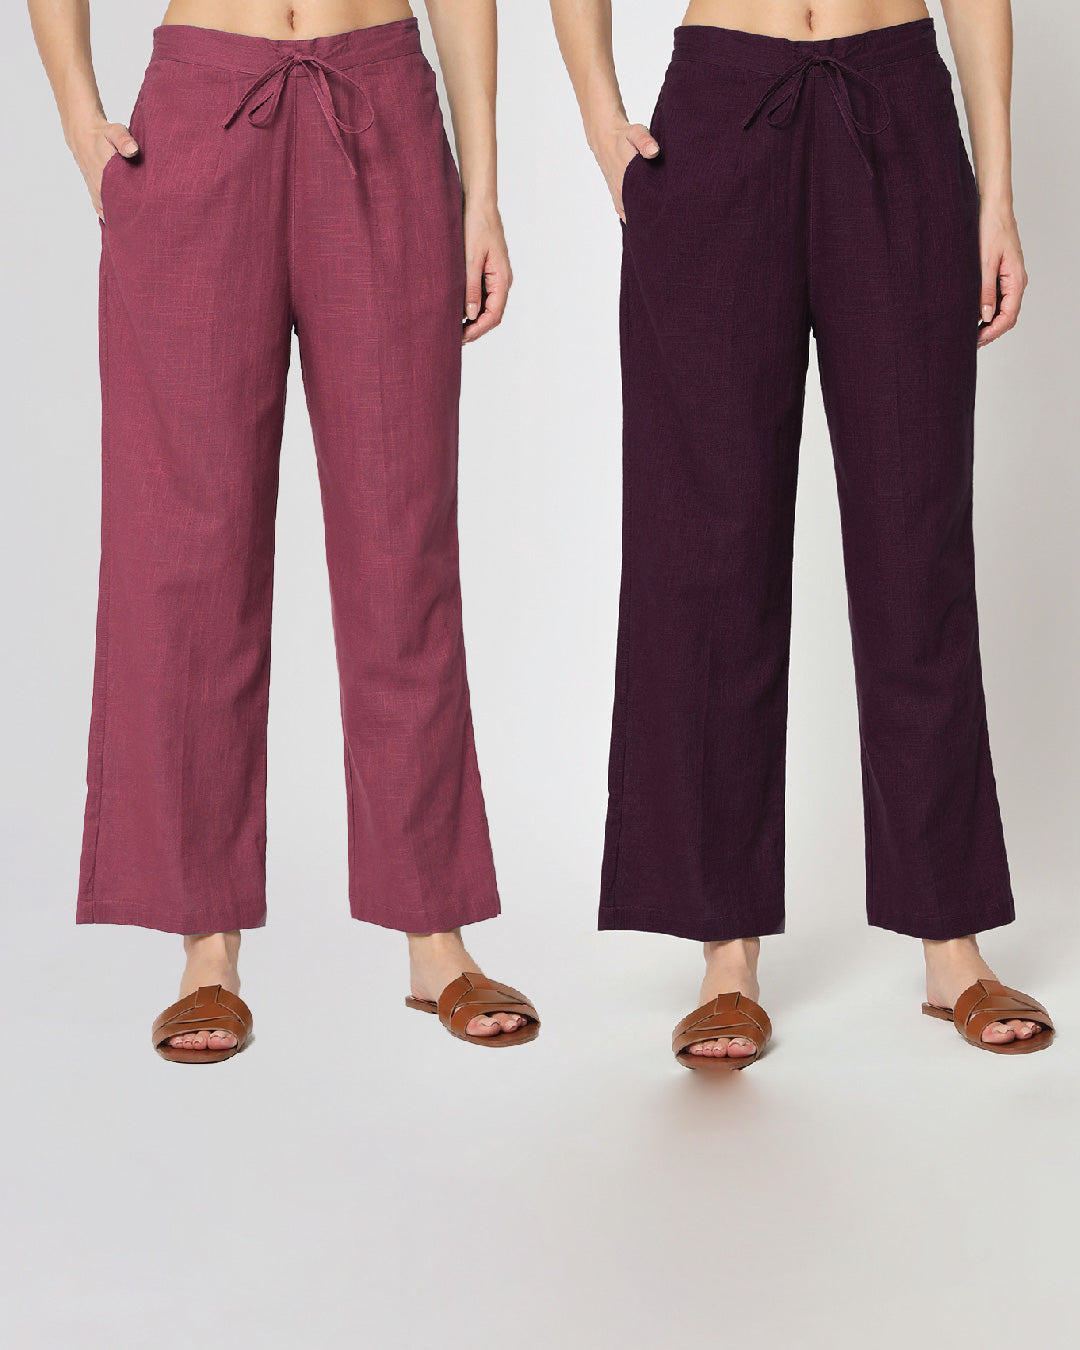 Combo: Wings Of Love & Plum Passion Straight Pants- Set of 2